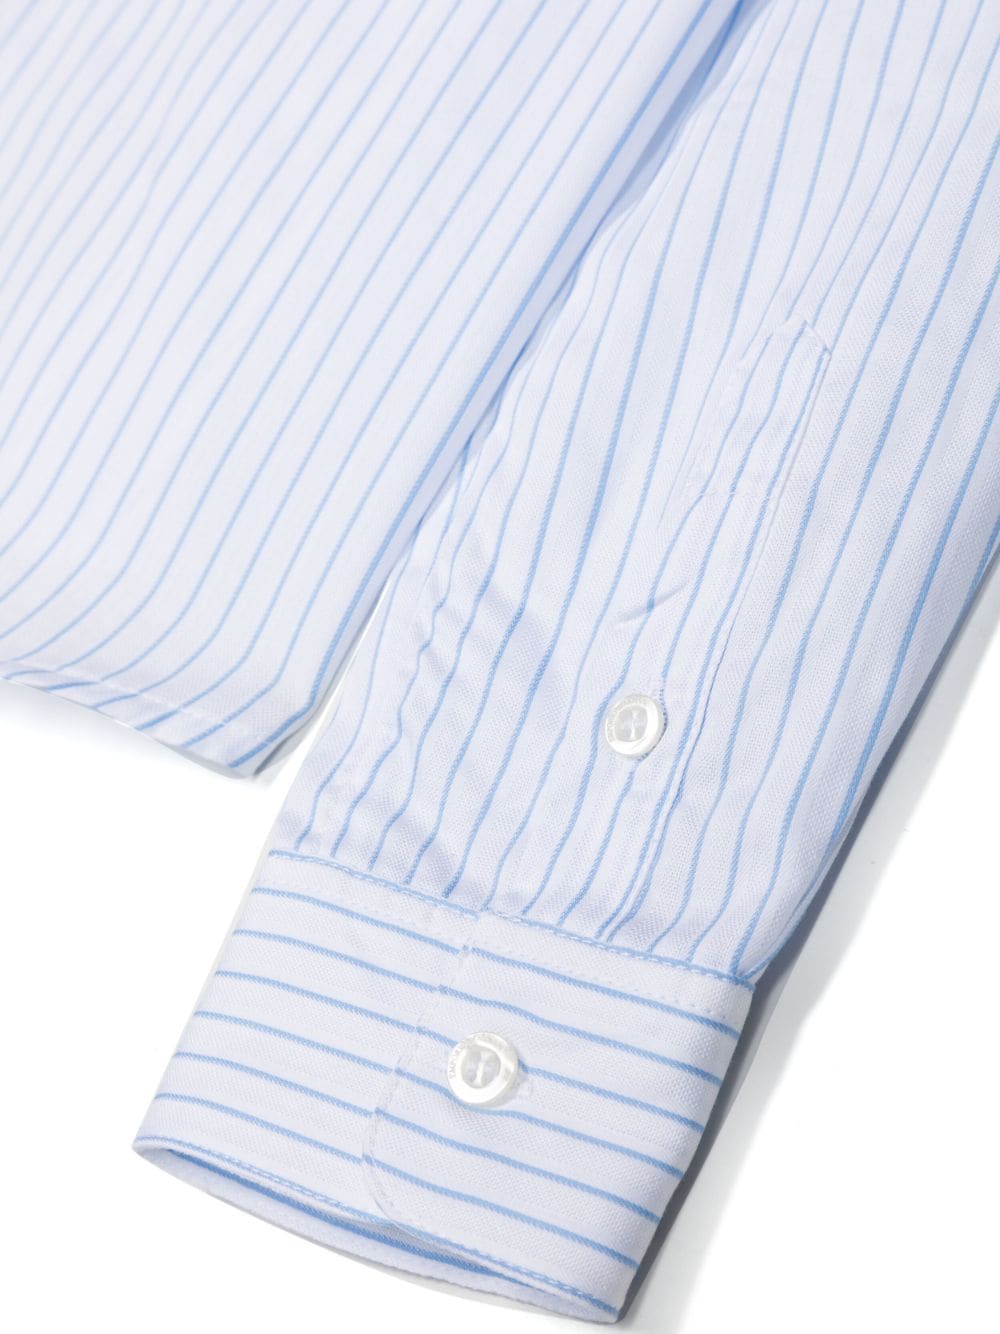 Long-sleeved striped cotton shirt